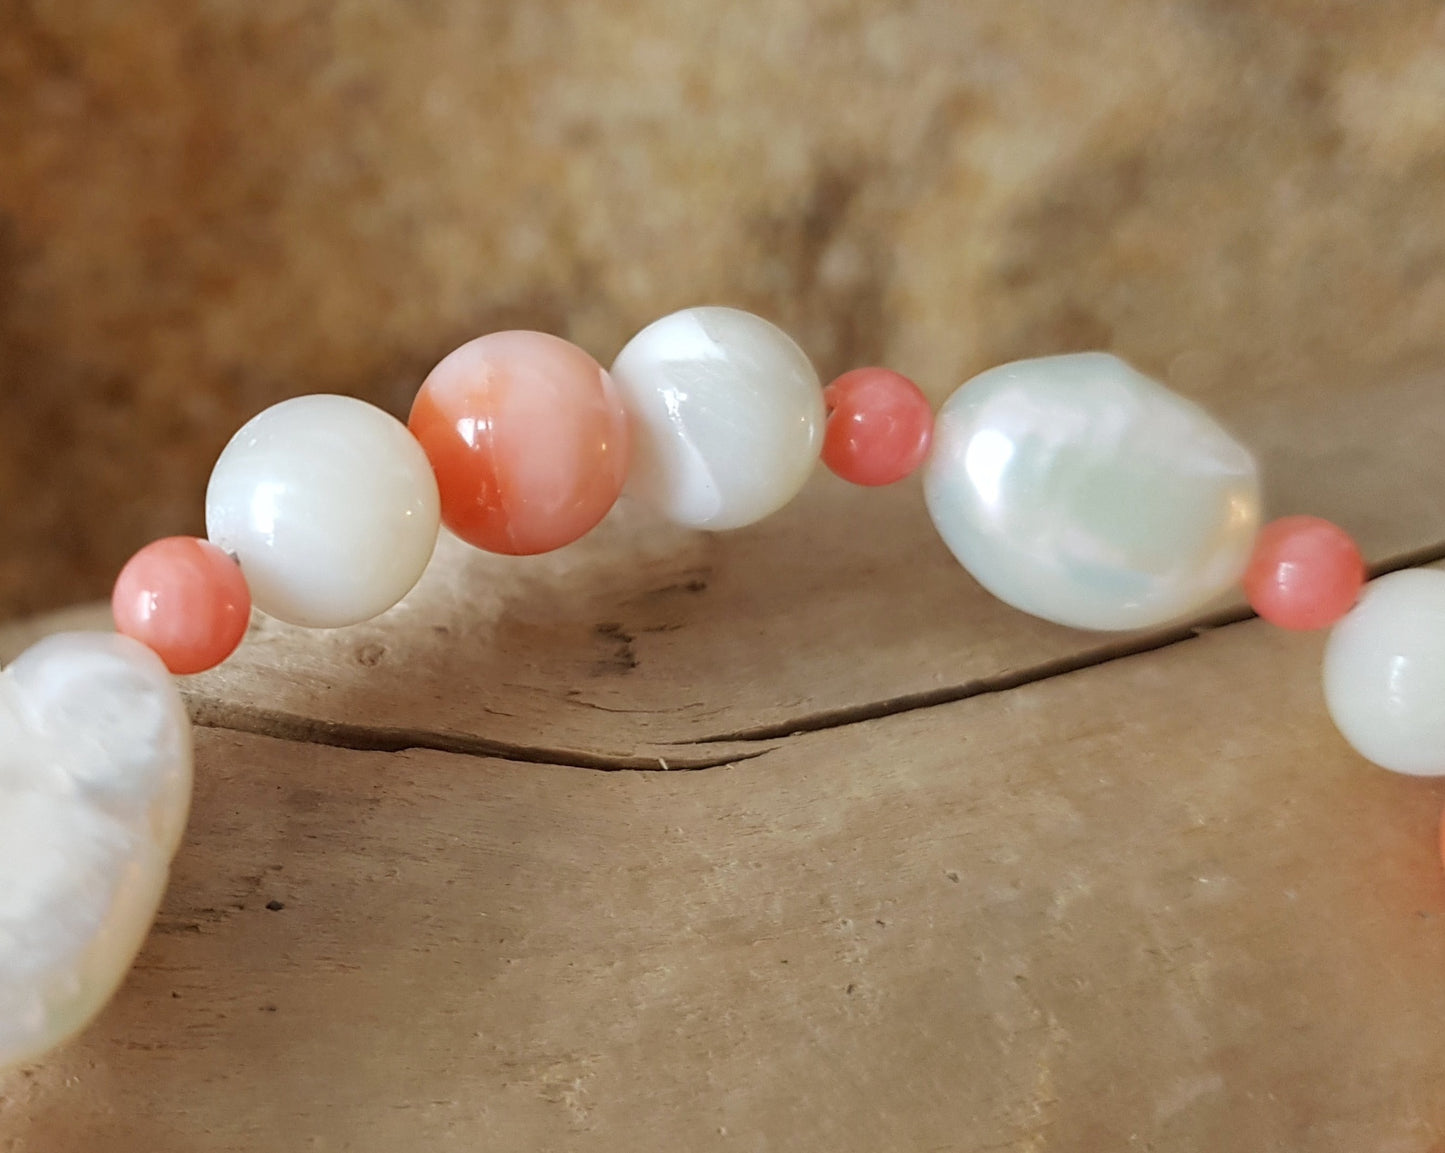 Angle Skin Coral, Mother of Pearl, Freshwater Cultured Pearl Beaded Bracelet. Pale orange Coral, white Mother of Pearl, white Pearls.